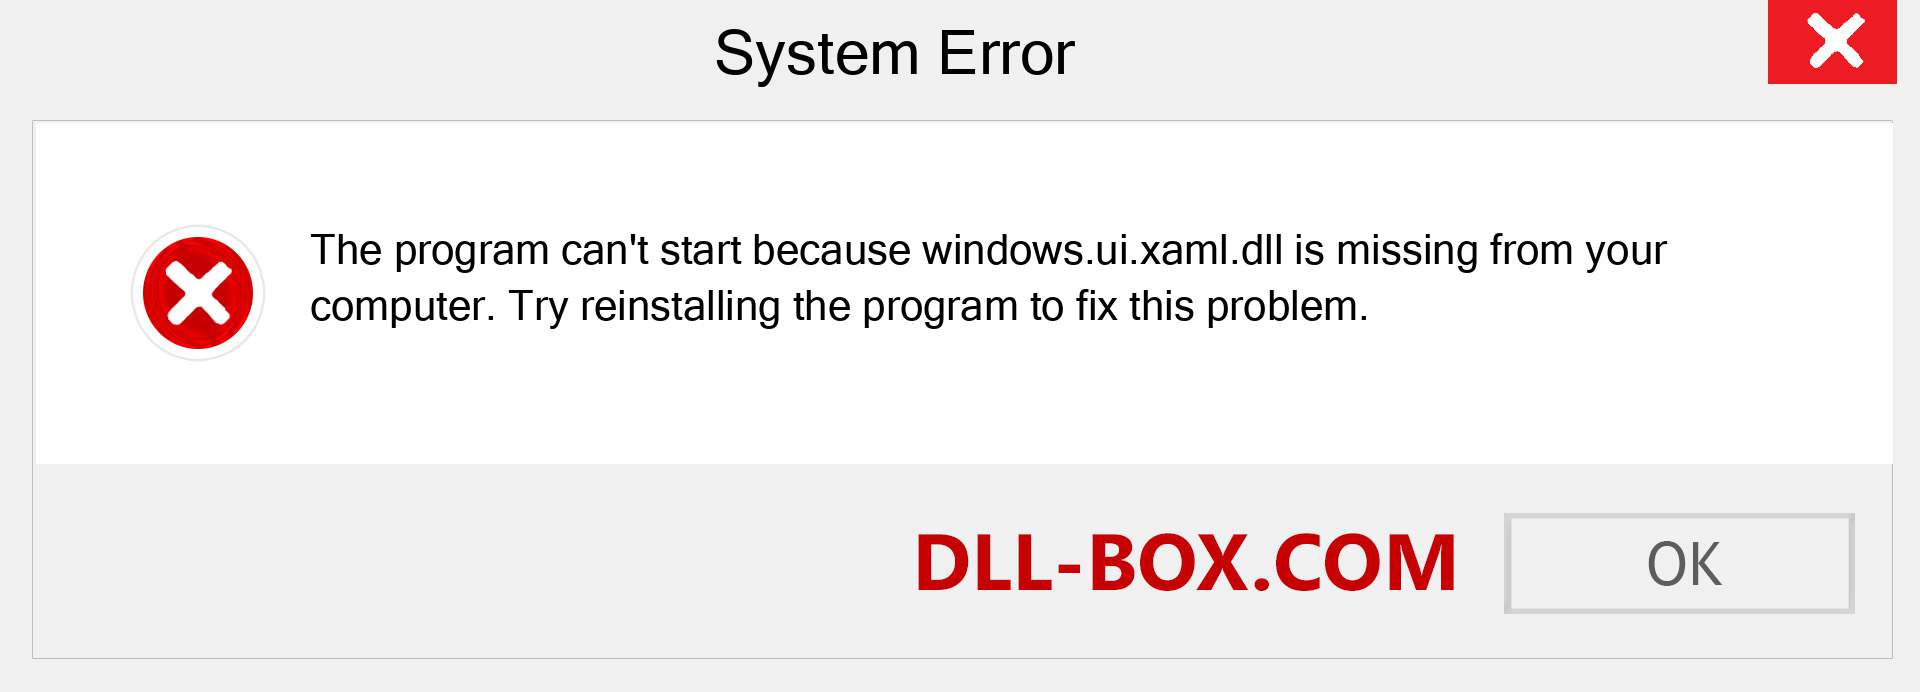  windows.ui.xaml.dll file is missing?. Download for Windows 7, 8, 10 - Fix  windows.ui.xaml dll Missing Error on Windows, photos, images